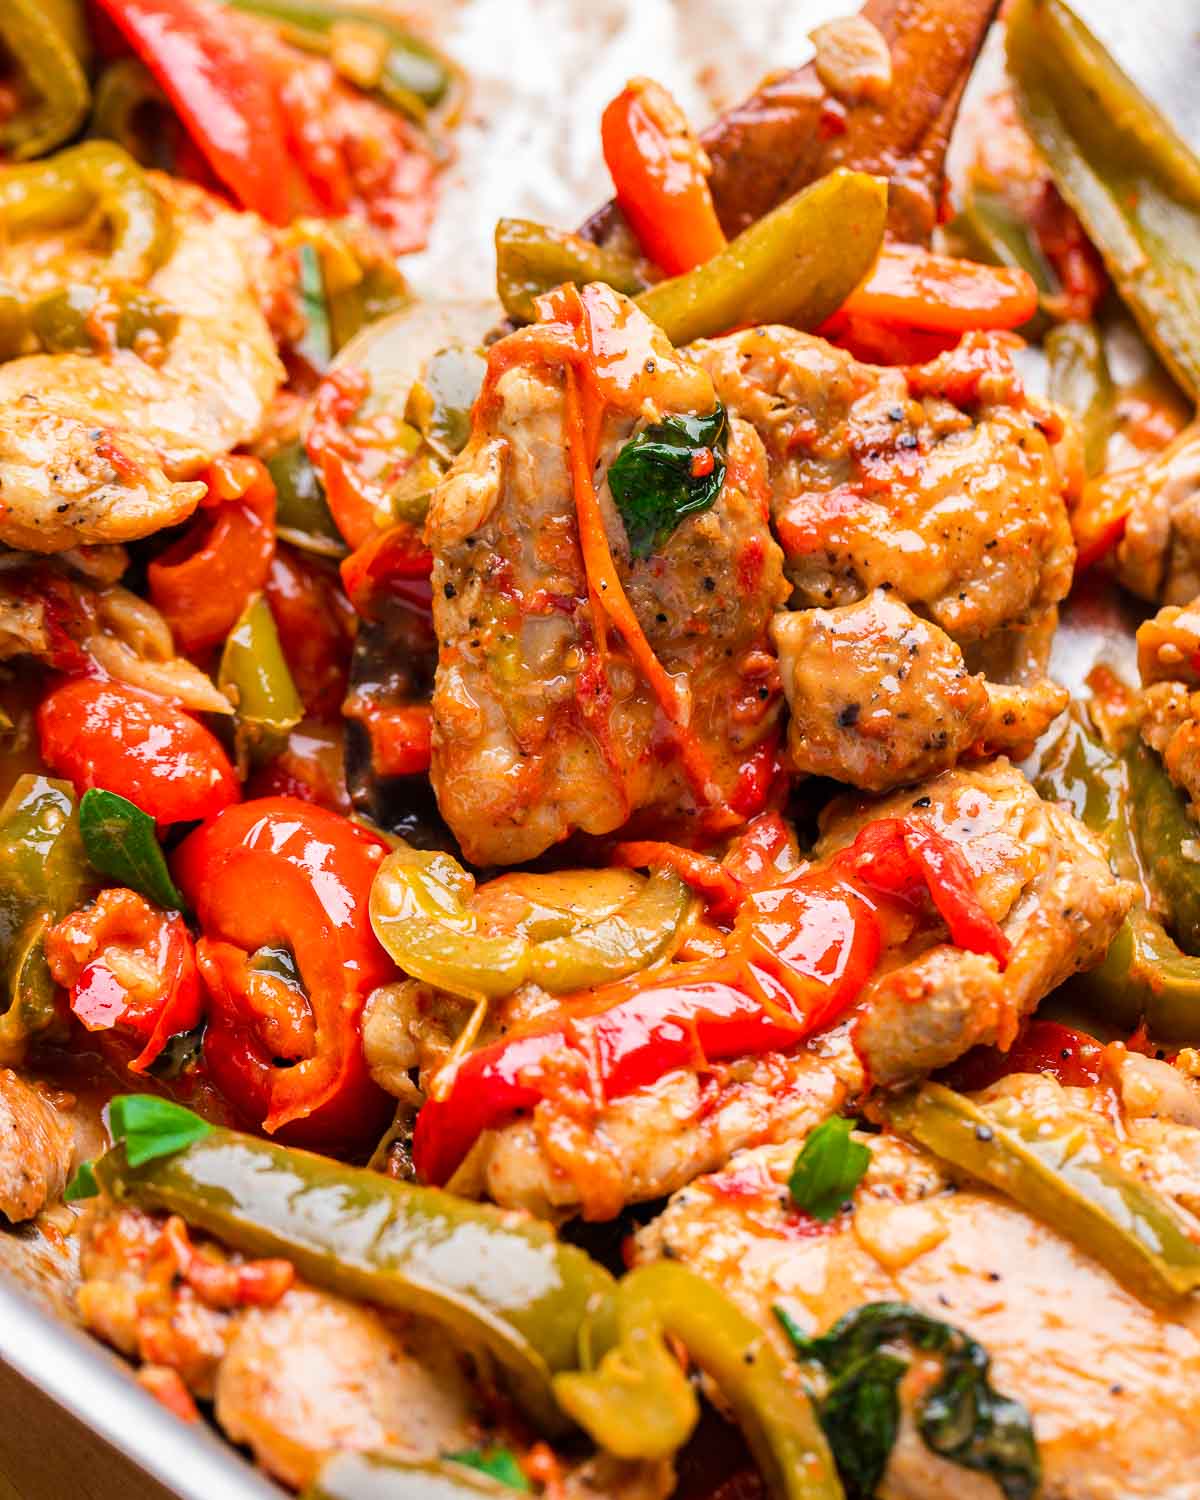 Chicken and peppers in large roasting pan.